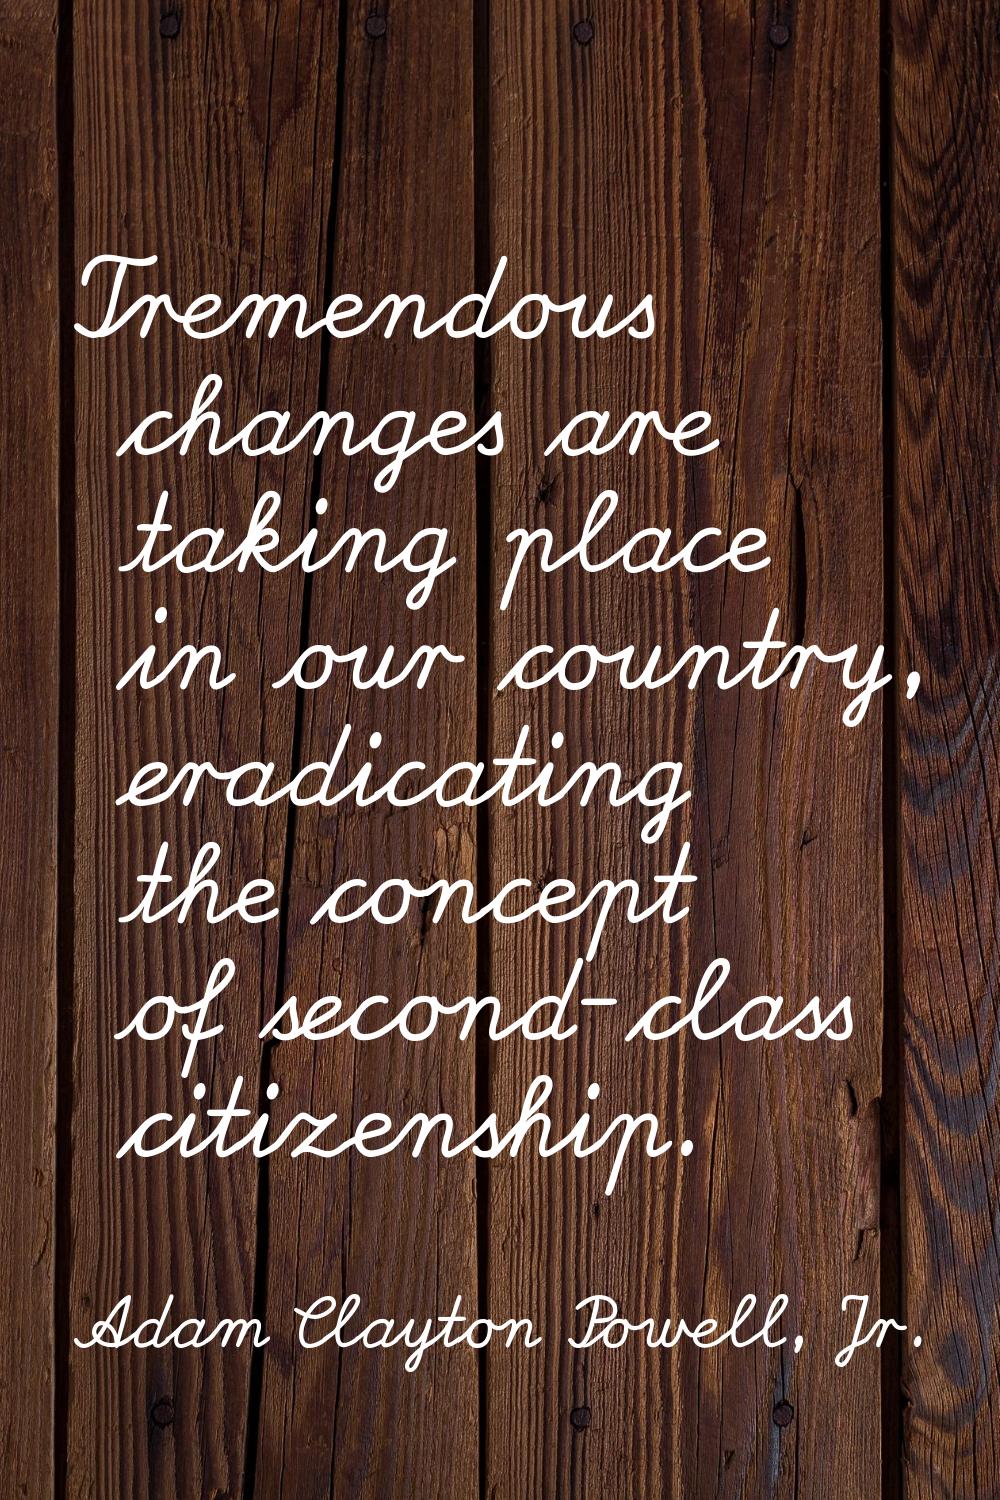 Tremendous changes are taking place in our country, eradicating the concept of second-class citizen